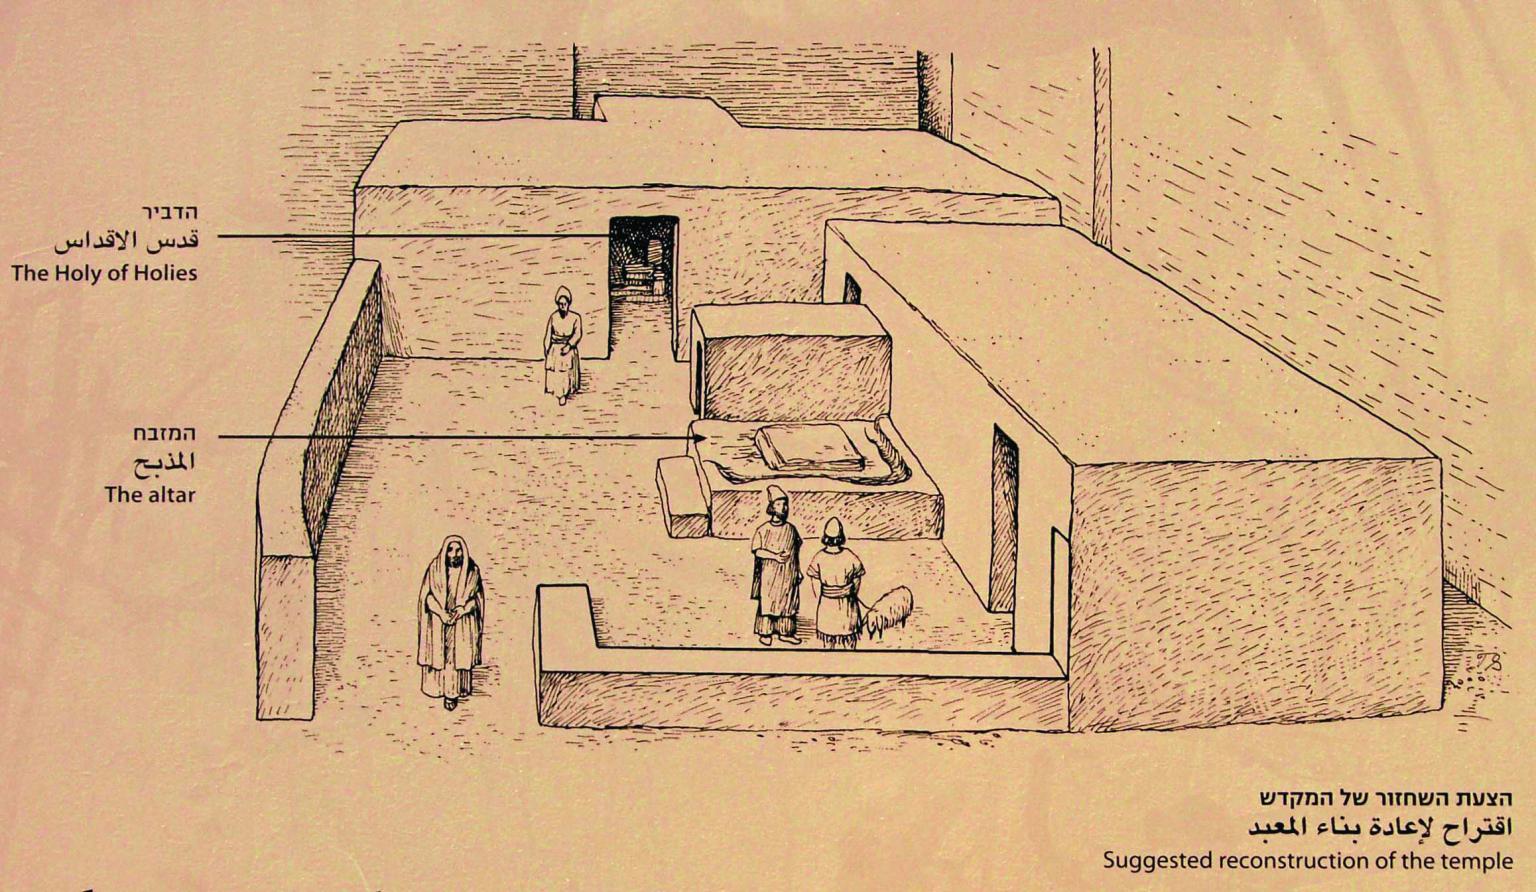 Drawing of reconstructed sanctuary with roofed stone structures, large courtyard, and altar with figures of men and an animal.